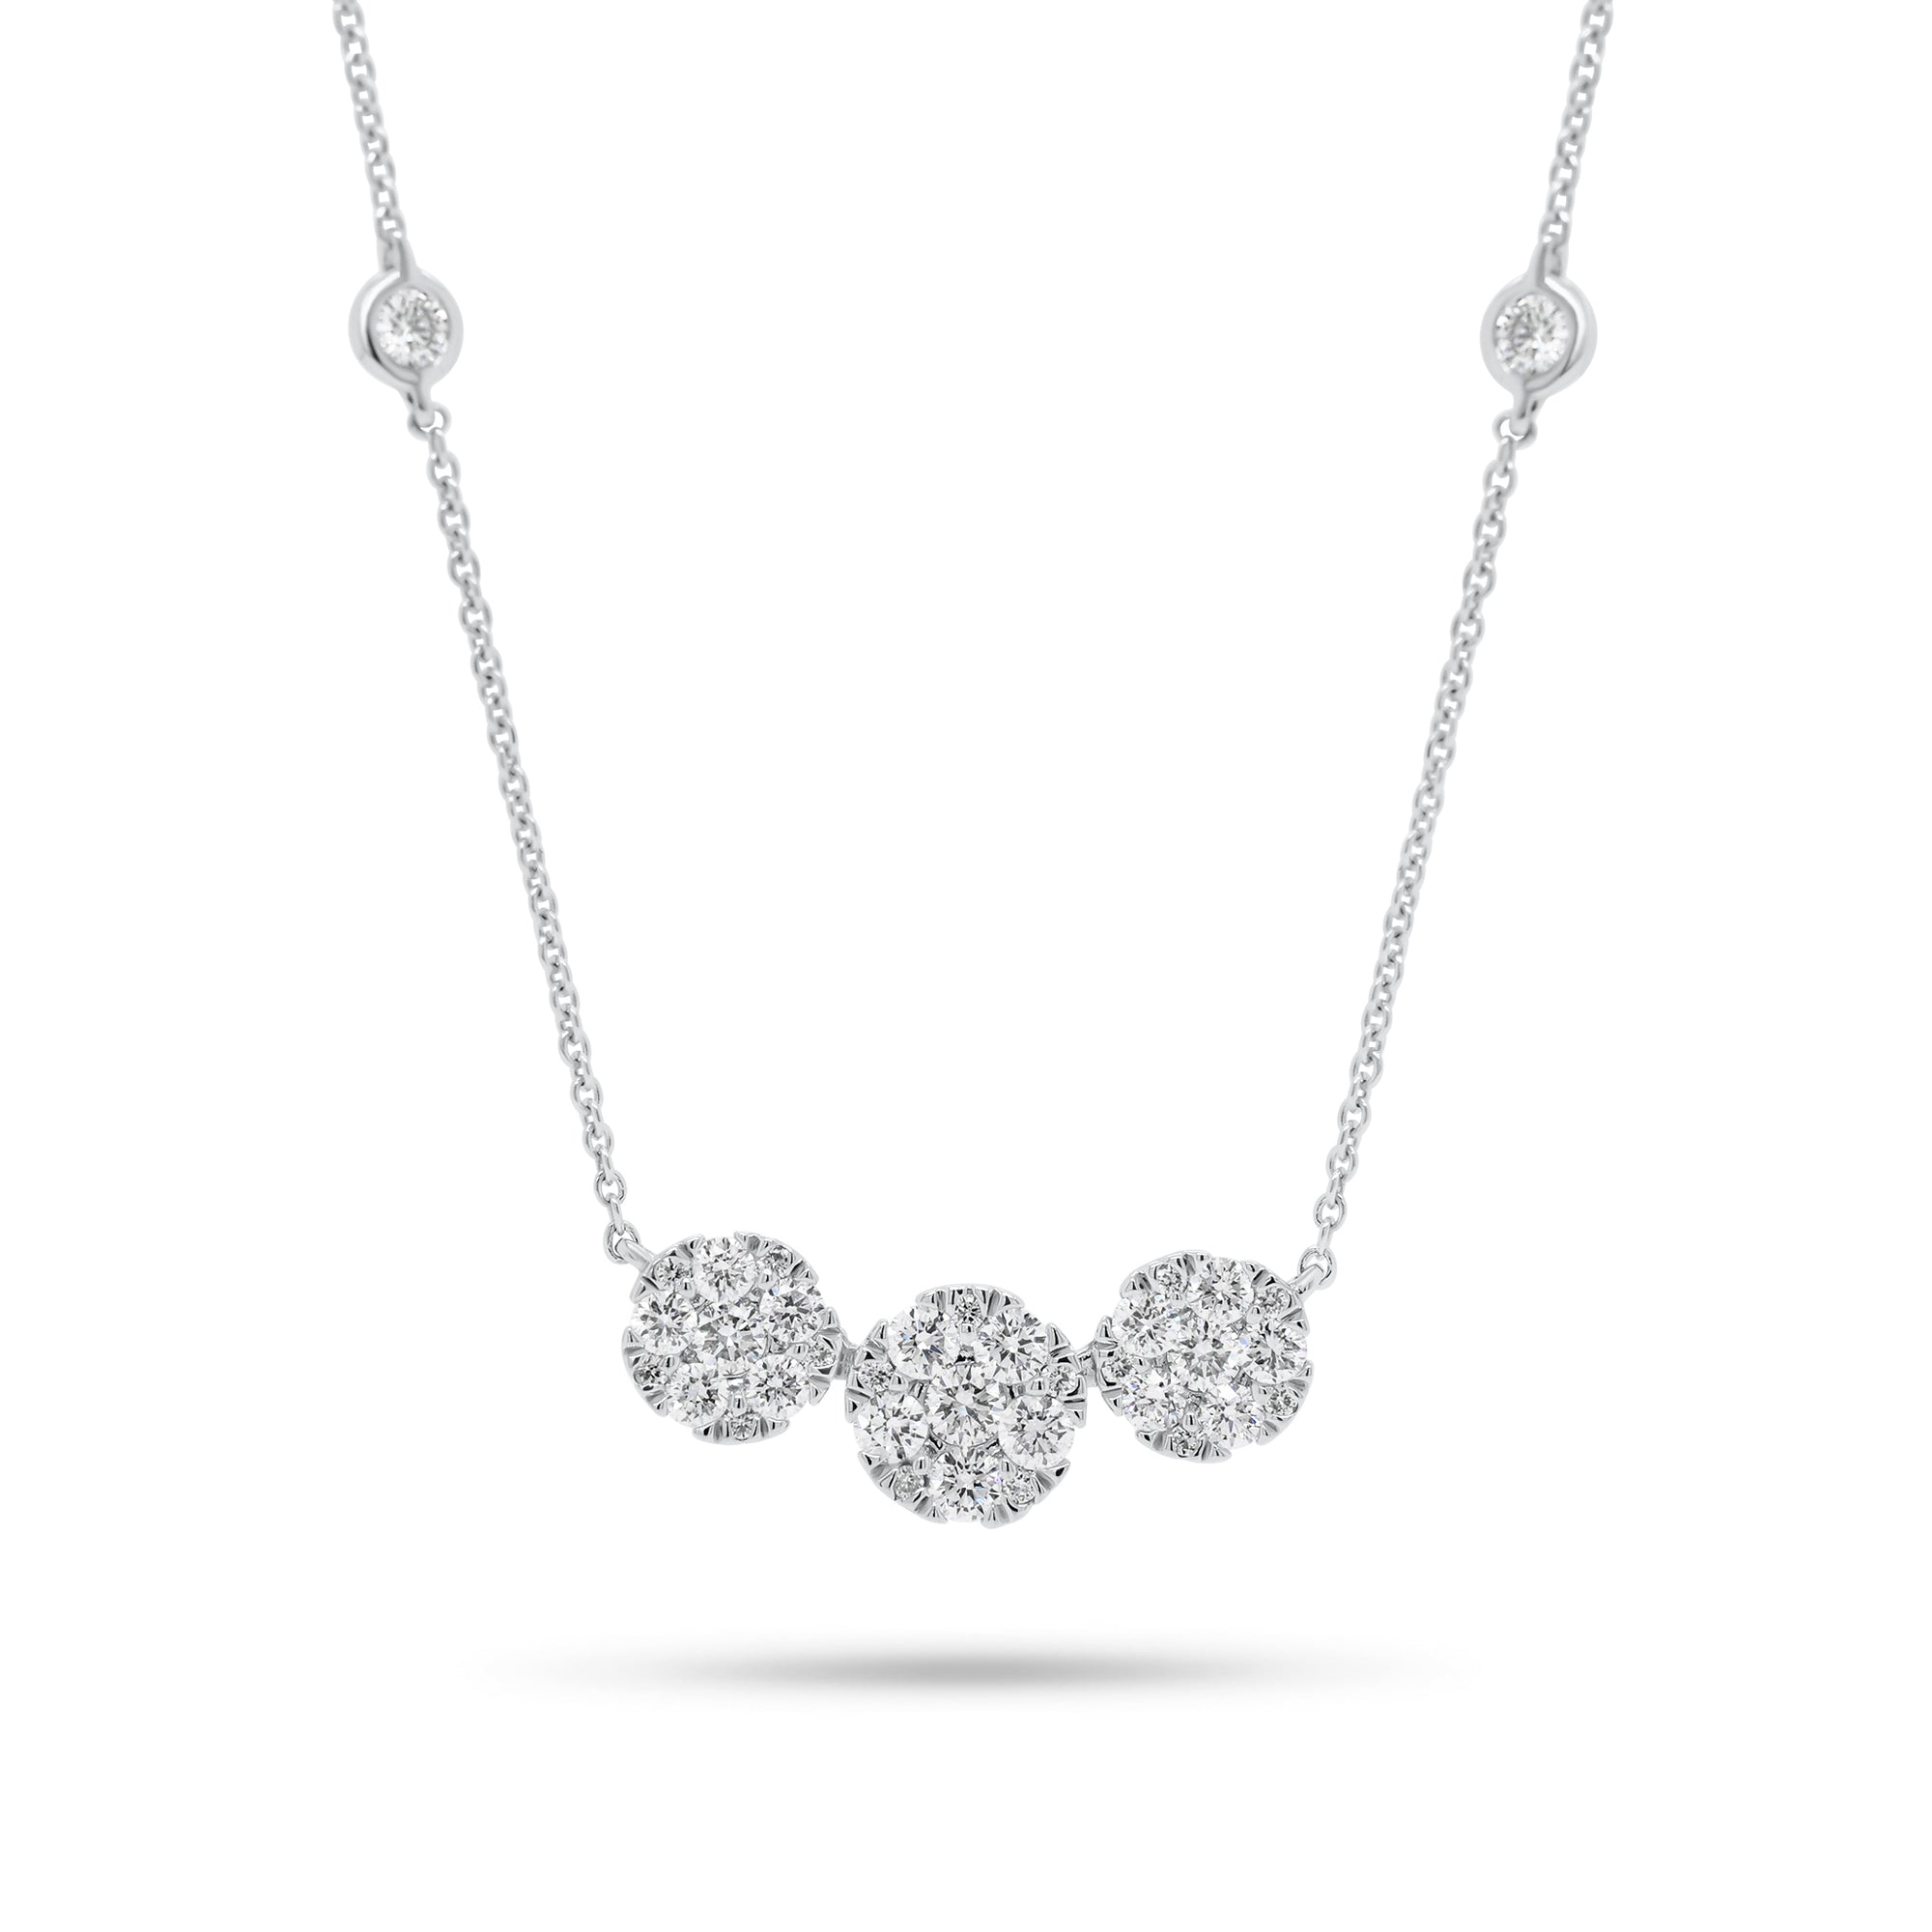 Halo Diamond Trio Necklace with Bezel-Set Diamonds - 18K gold weighing 2.88 grams  - 35 round diamonds weighing 0.64 carats